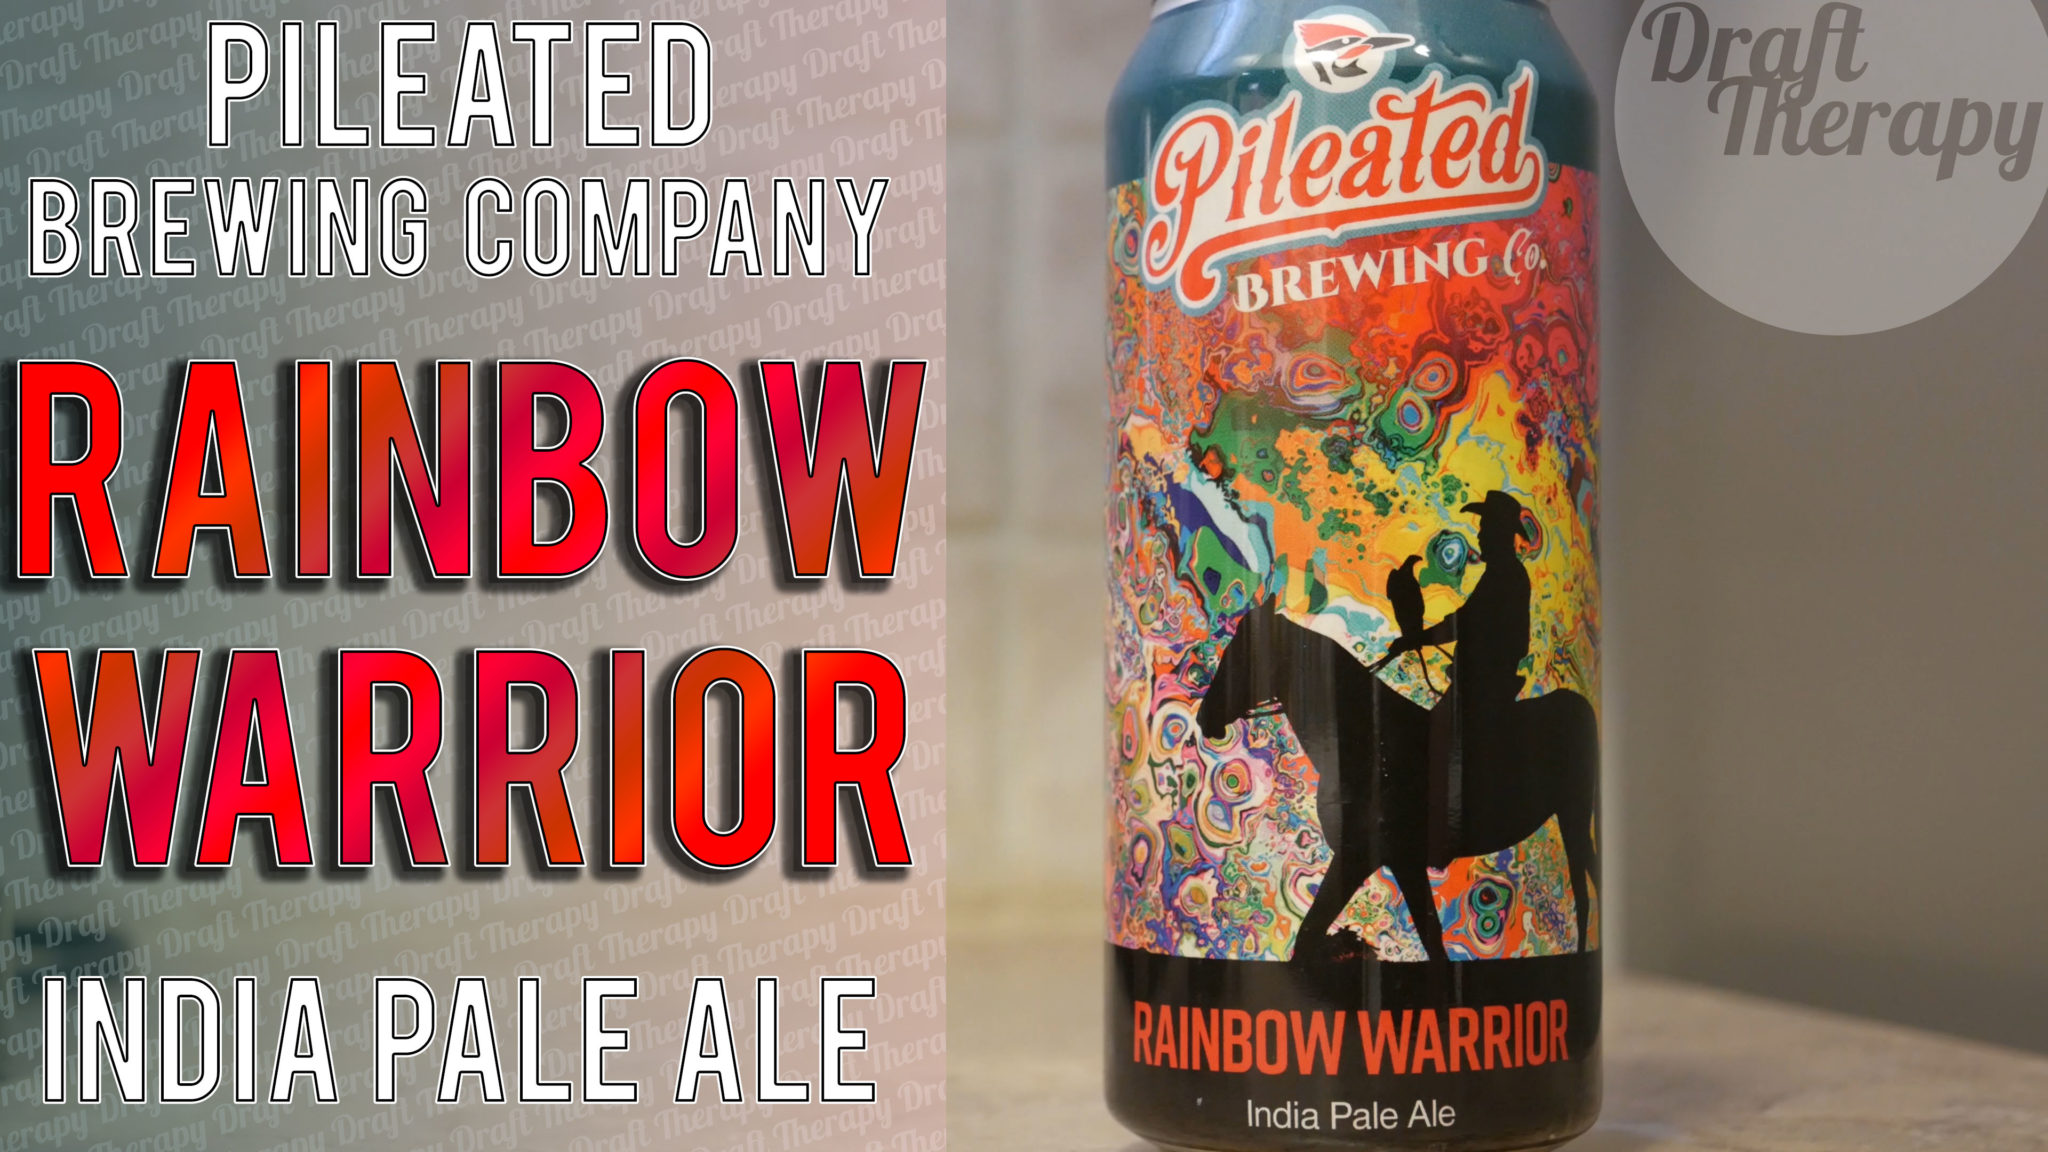 You are currently viewing Pileated Brewing Company – Rainbow Warrior IPA